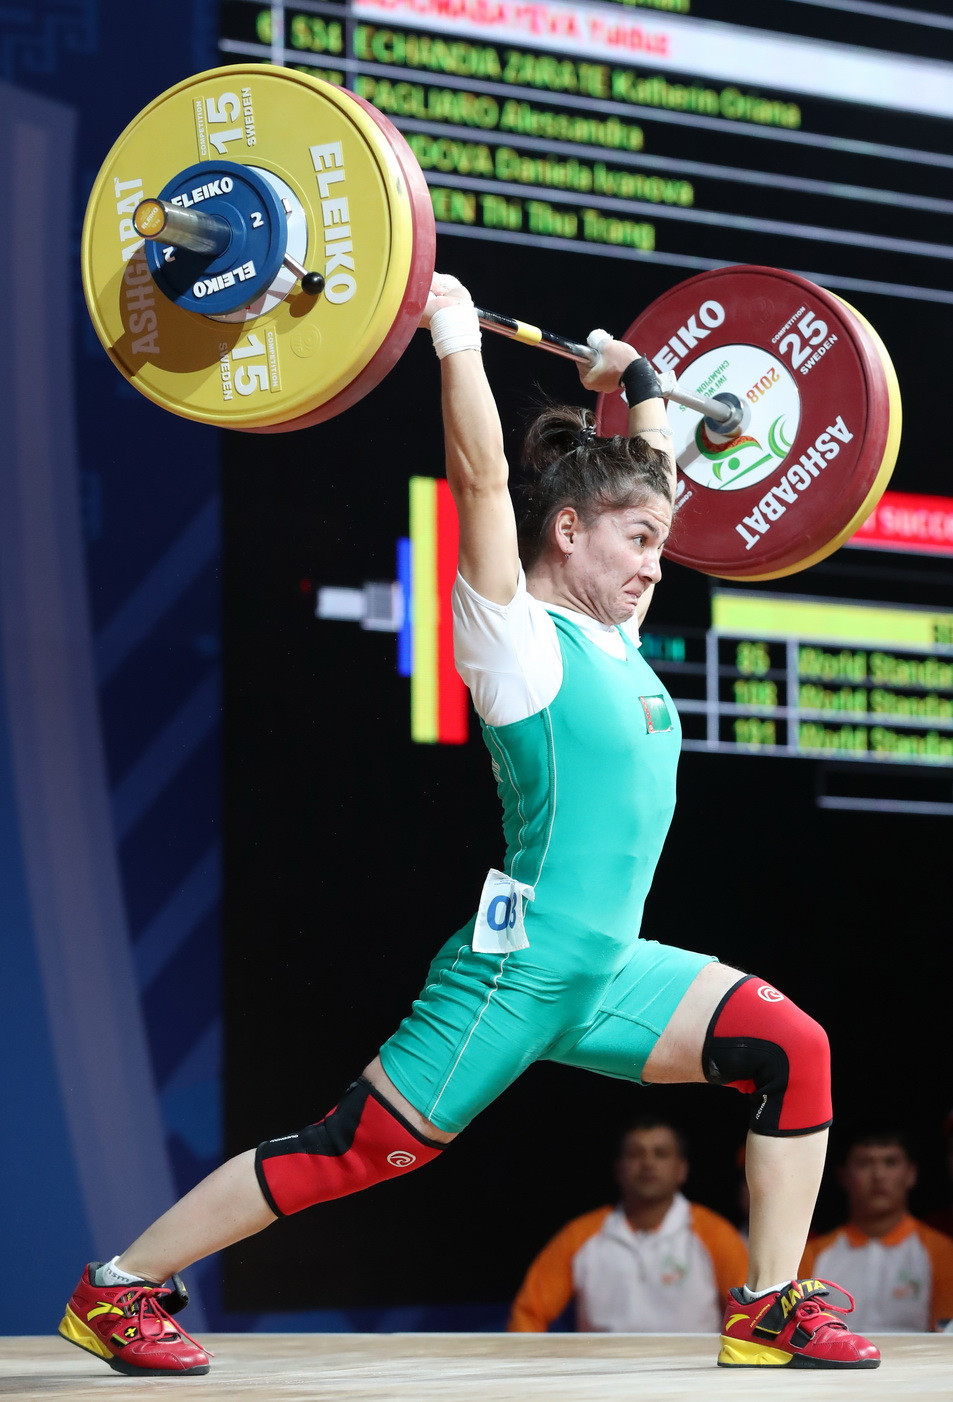 Rounding out all three podiums was home favourite Yulduz Dzhumabayeva with 75kg in the snatch and 94kg in the clean and jerk for a total of 169kg ©IWF